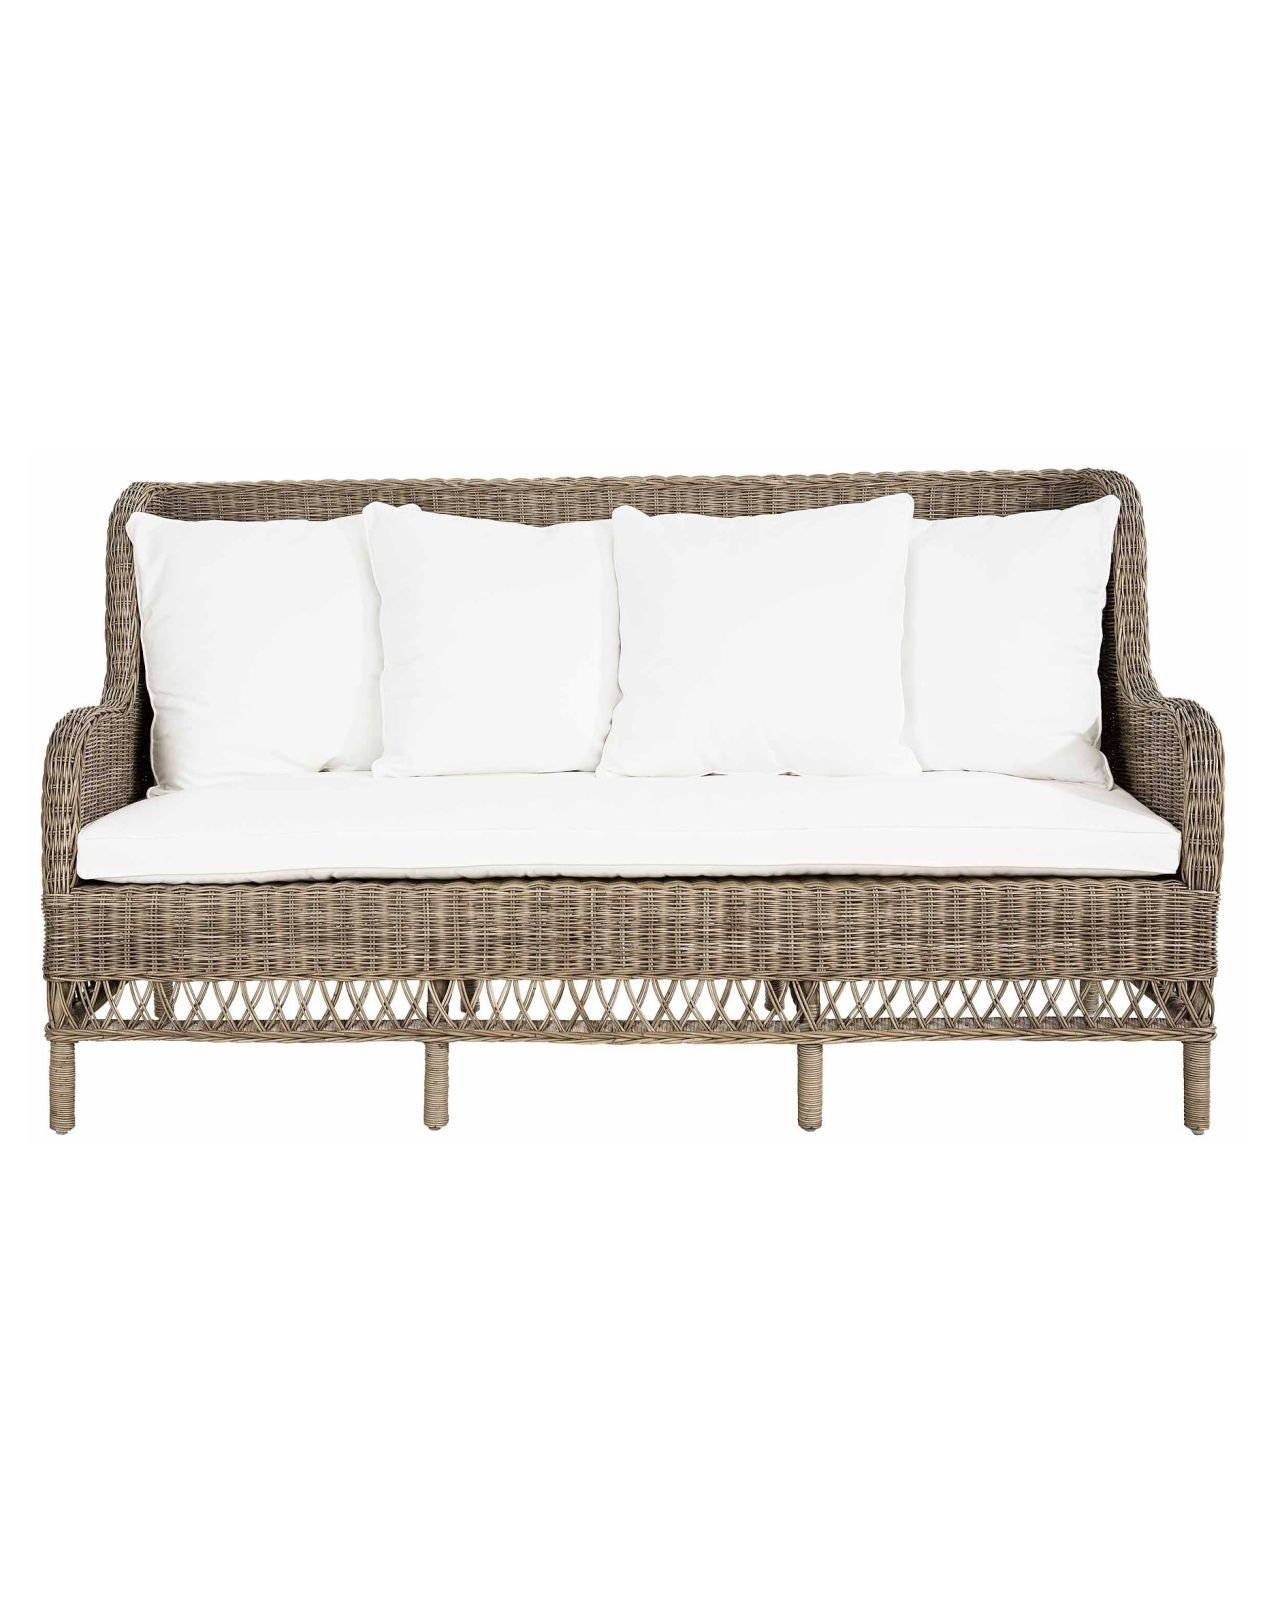 Estelle Couch, rattan, including cushions